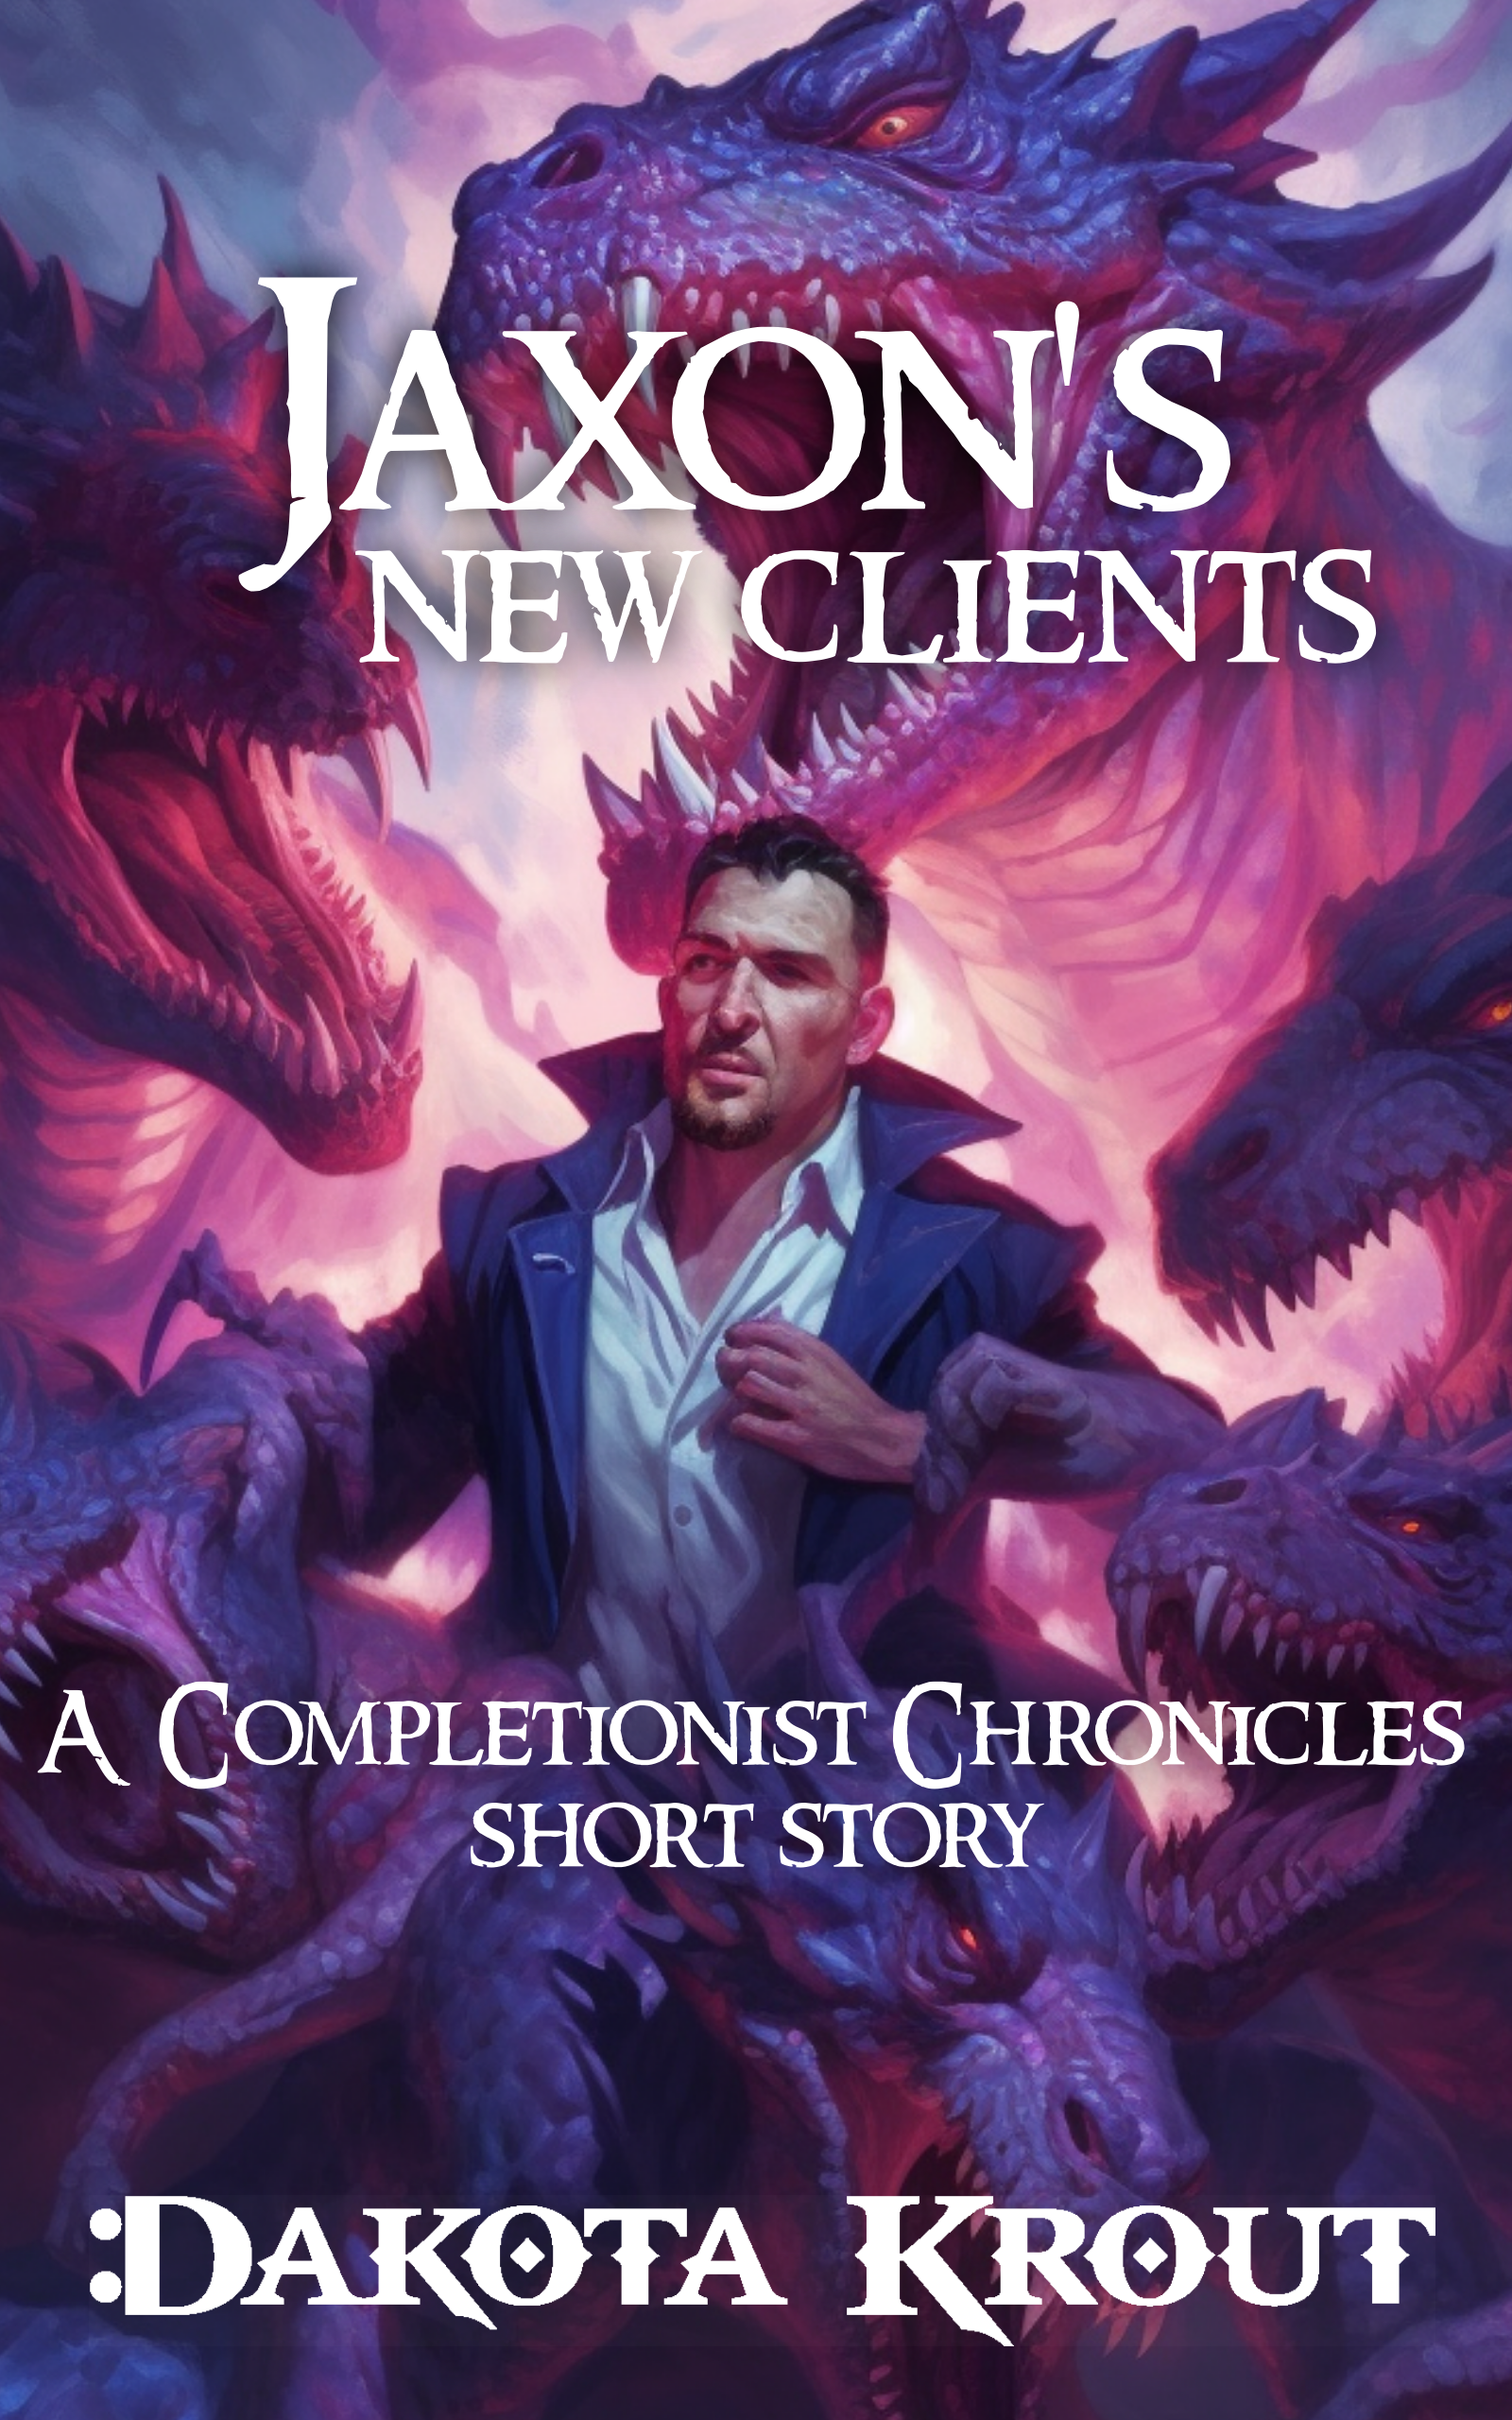 Jaxon's New Clients, A Completionist Chronicles Short Story